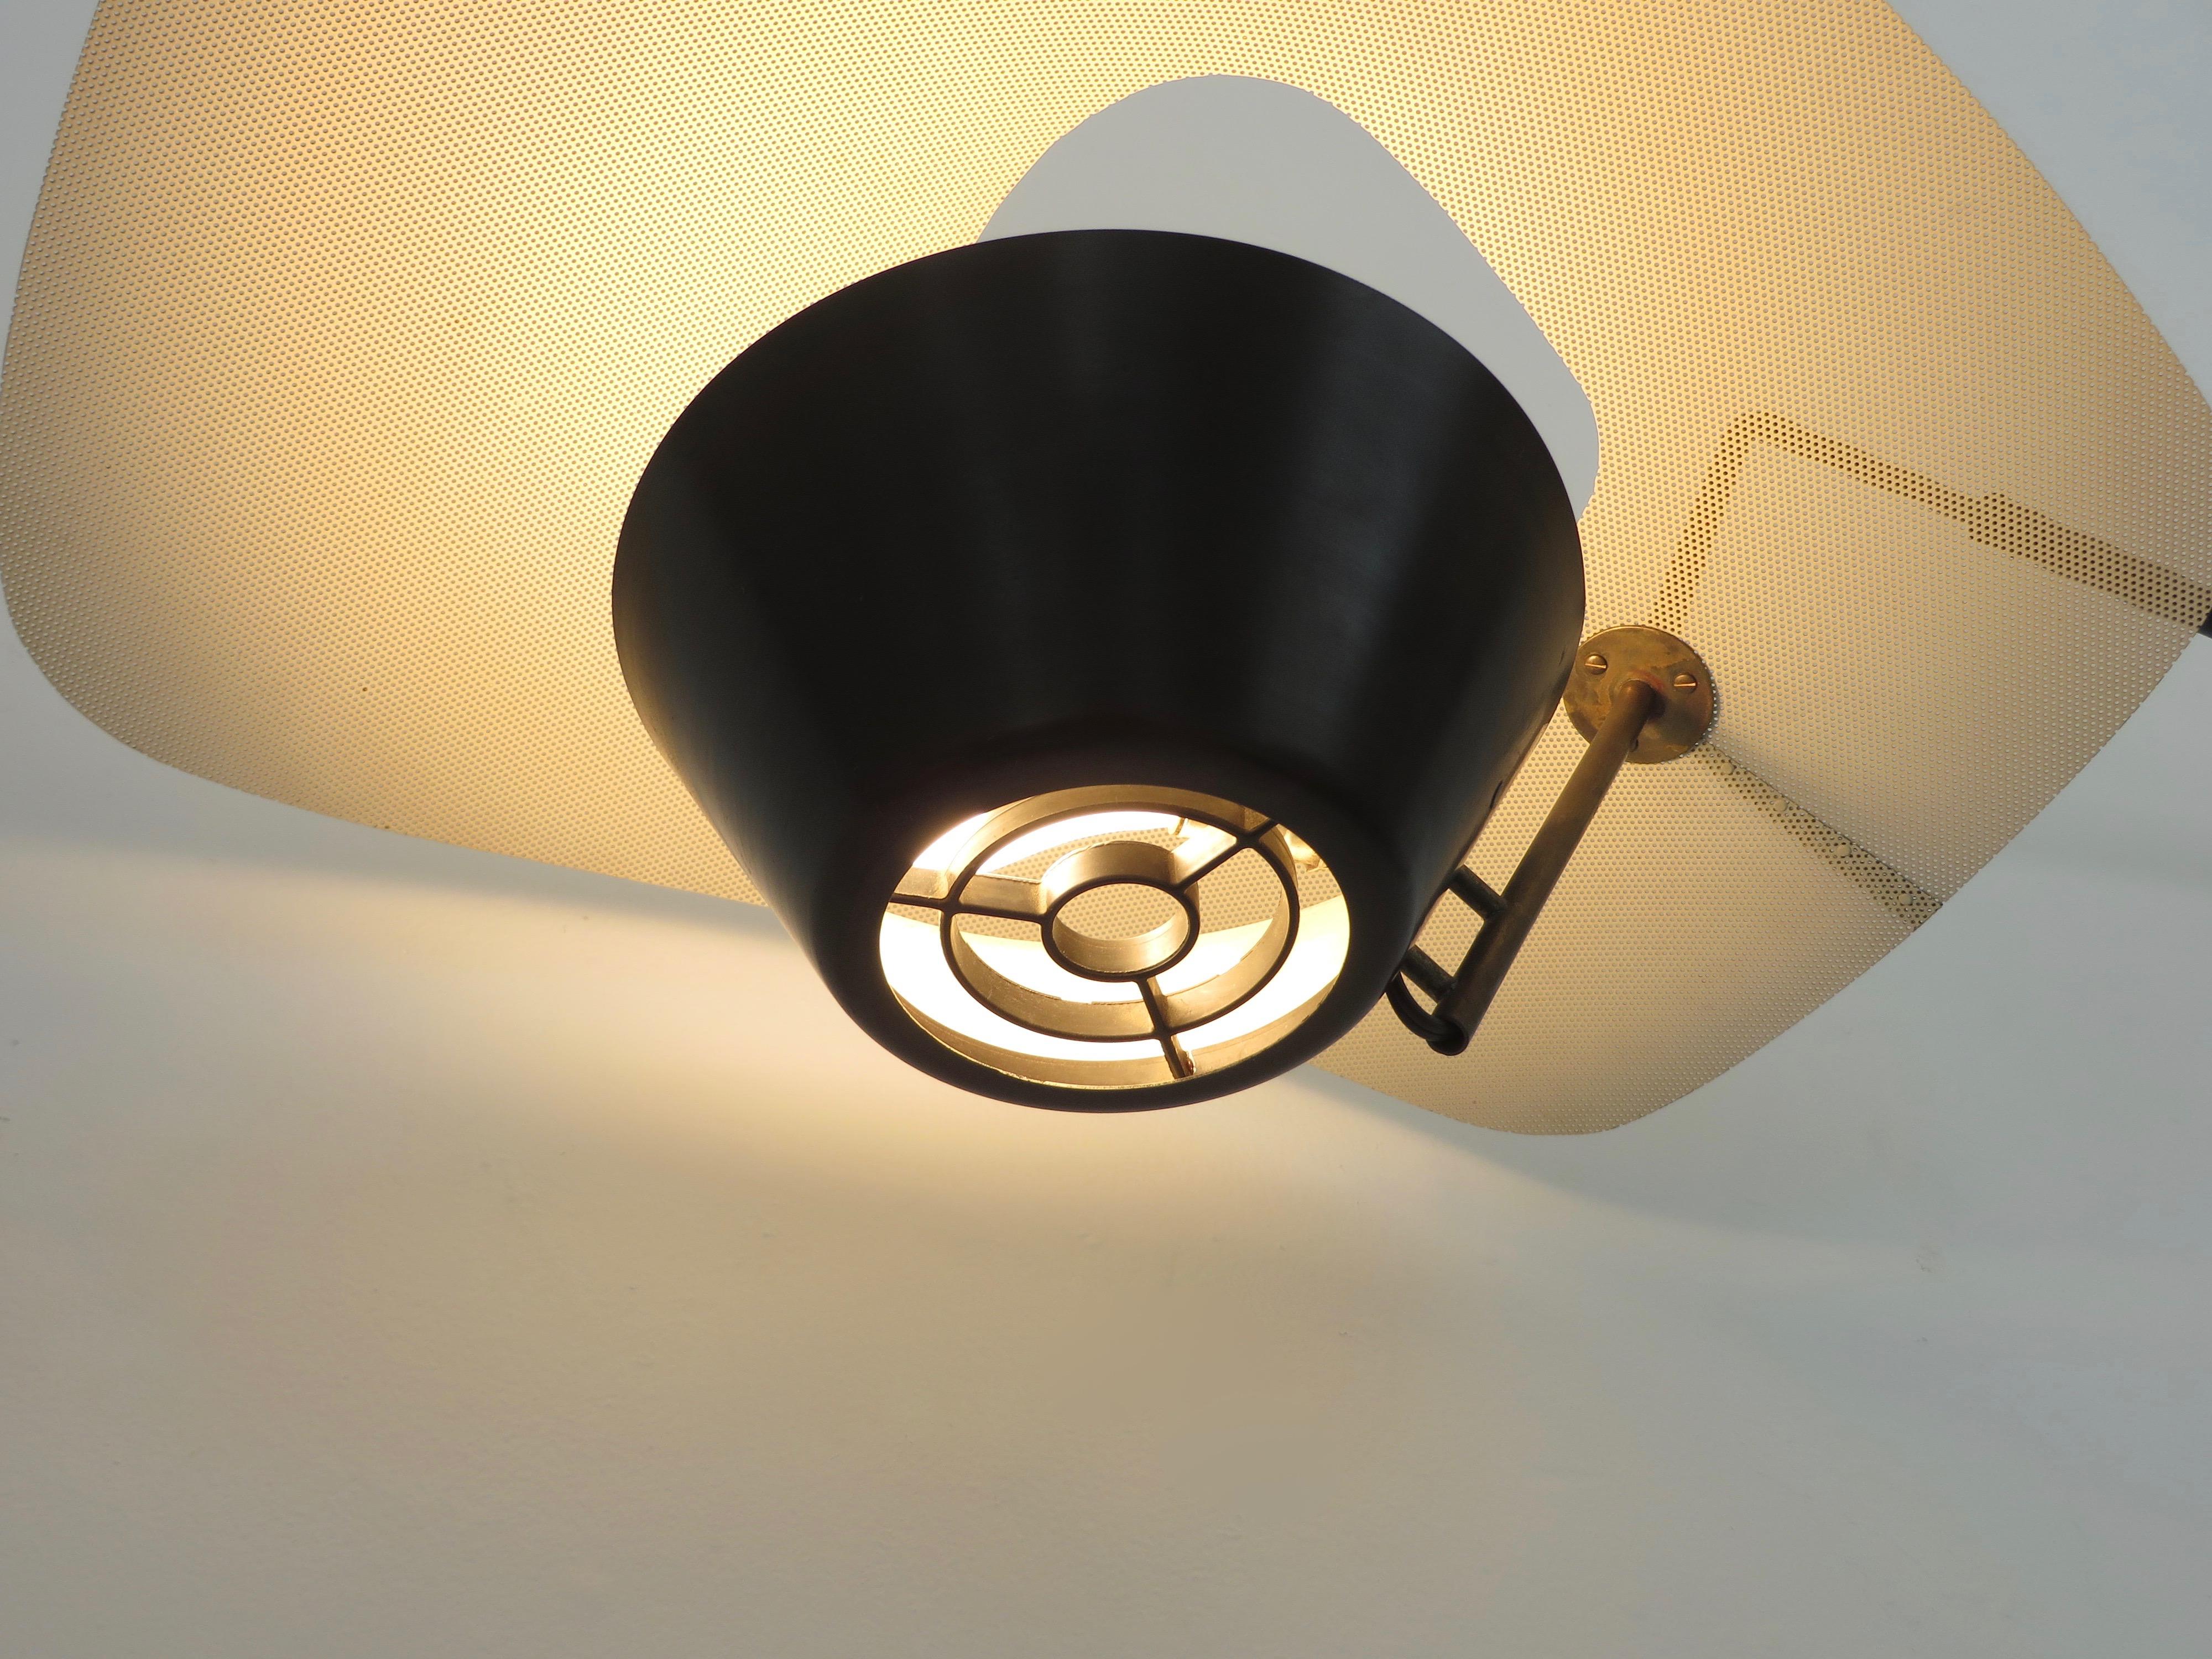 Kite Cerf Volant Applique Wall Light by Pierre Guariche Editioned by Disderot 11